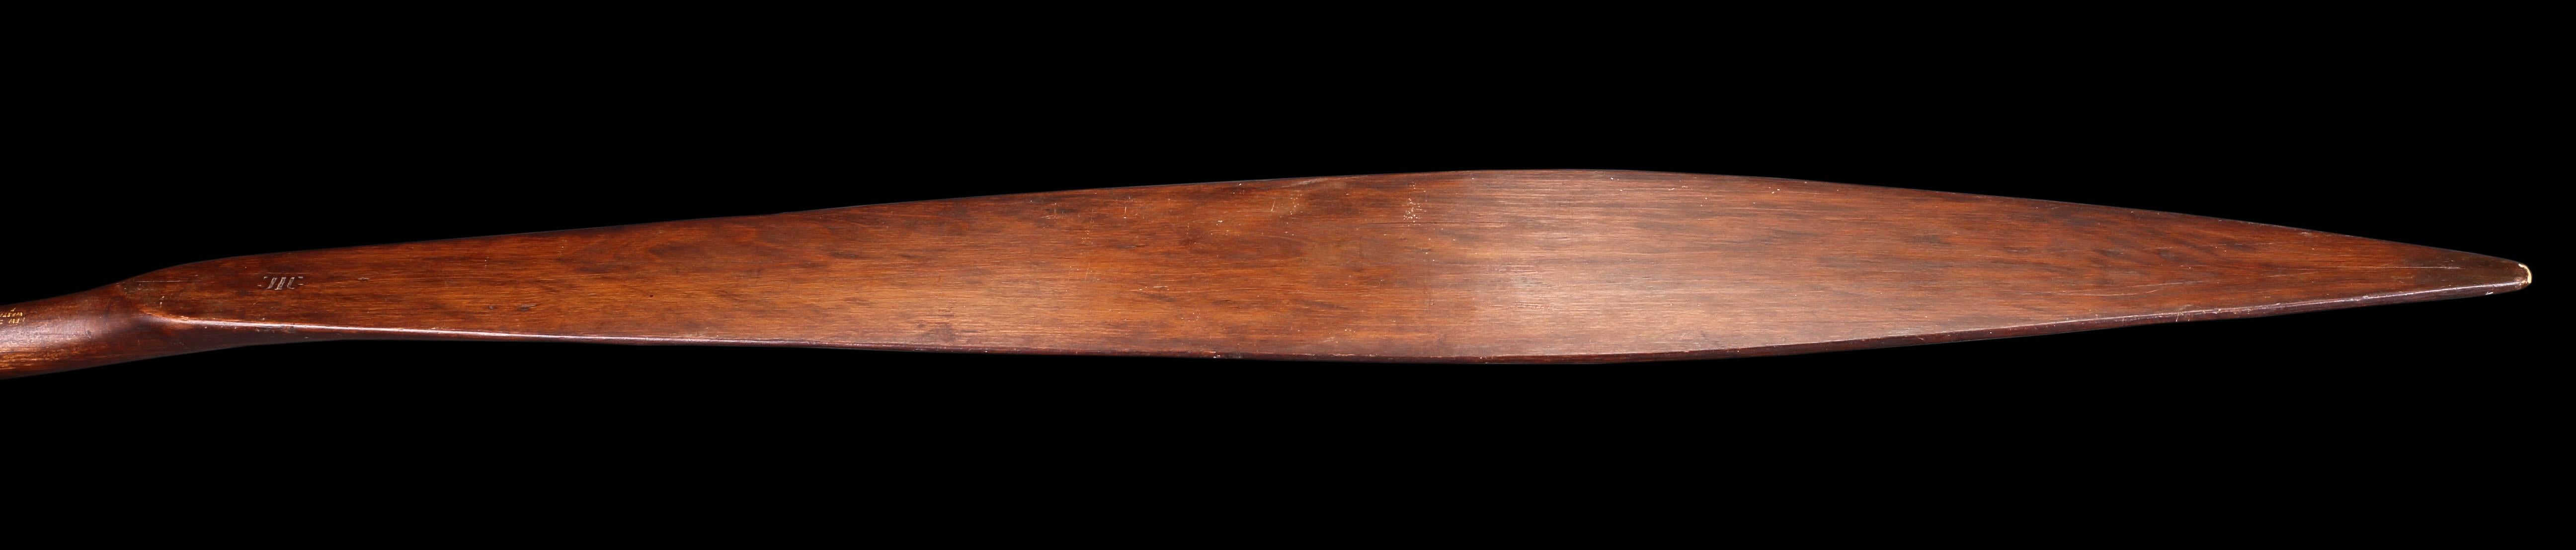 New Zealand A Very Rare Long Maori Paddle ‘Hoe’  For Sale